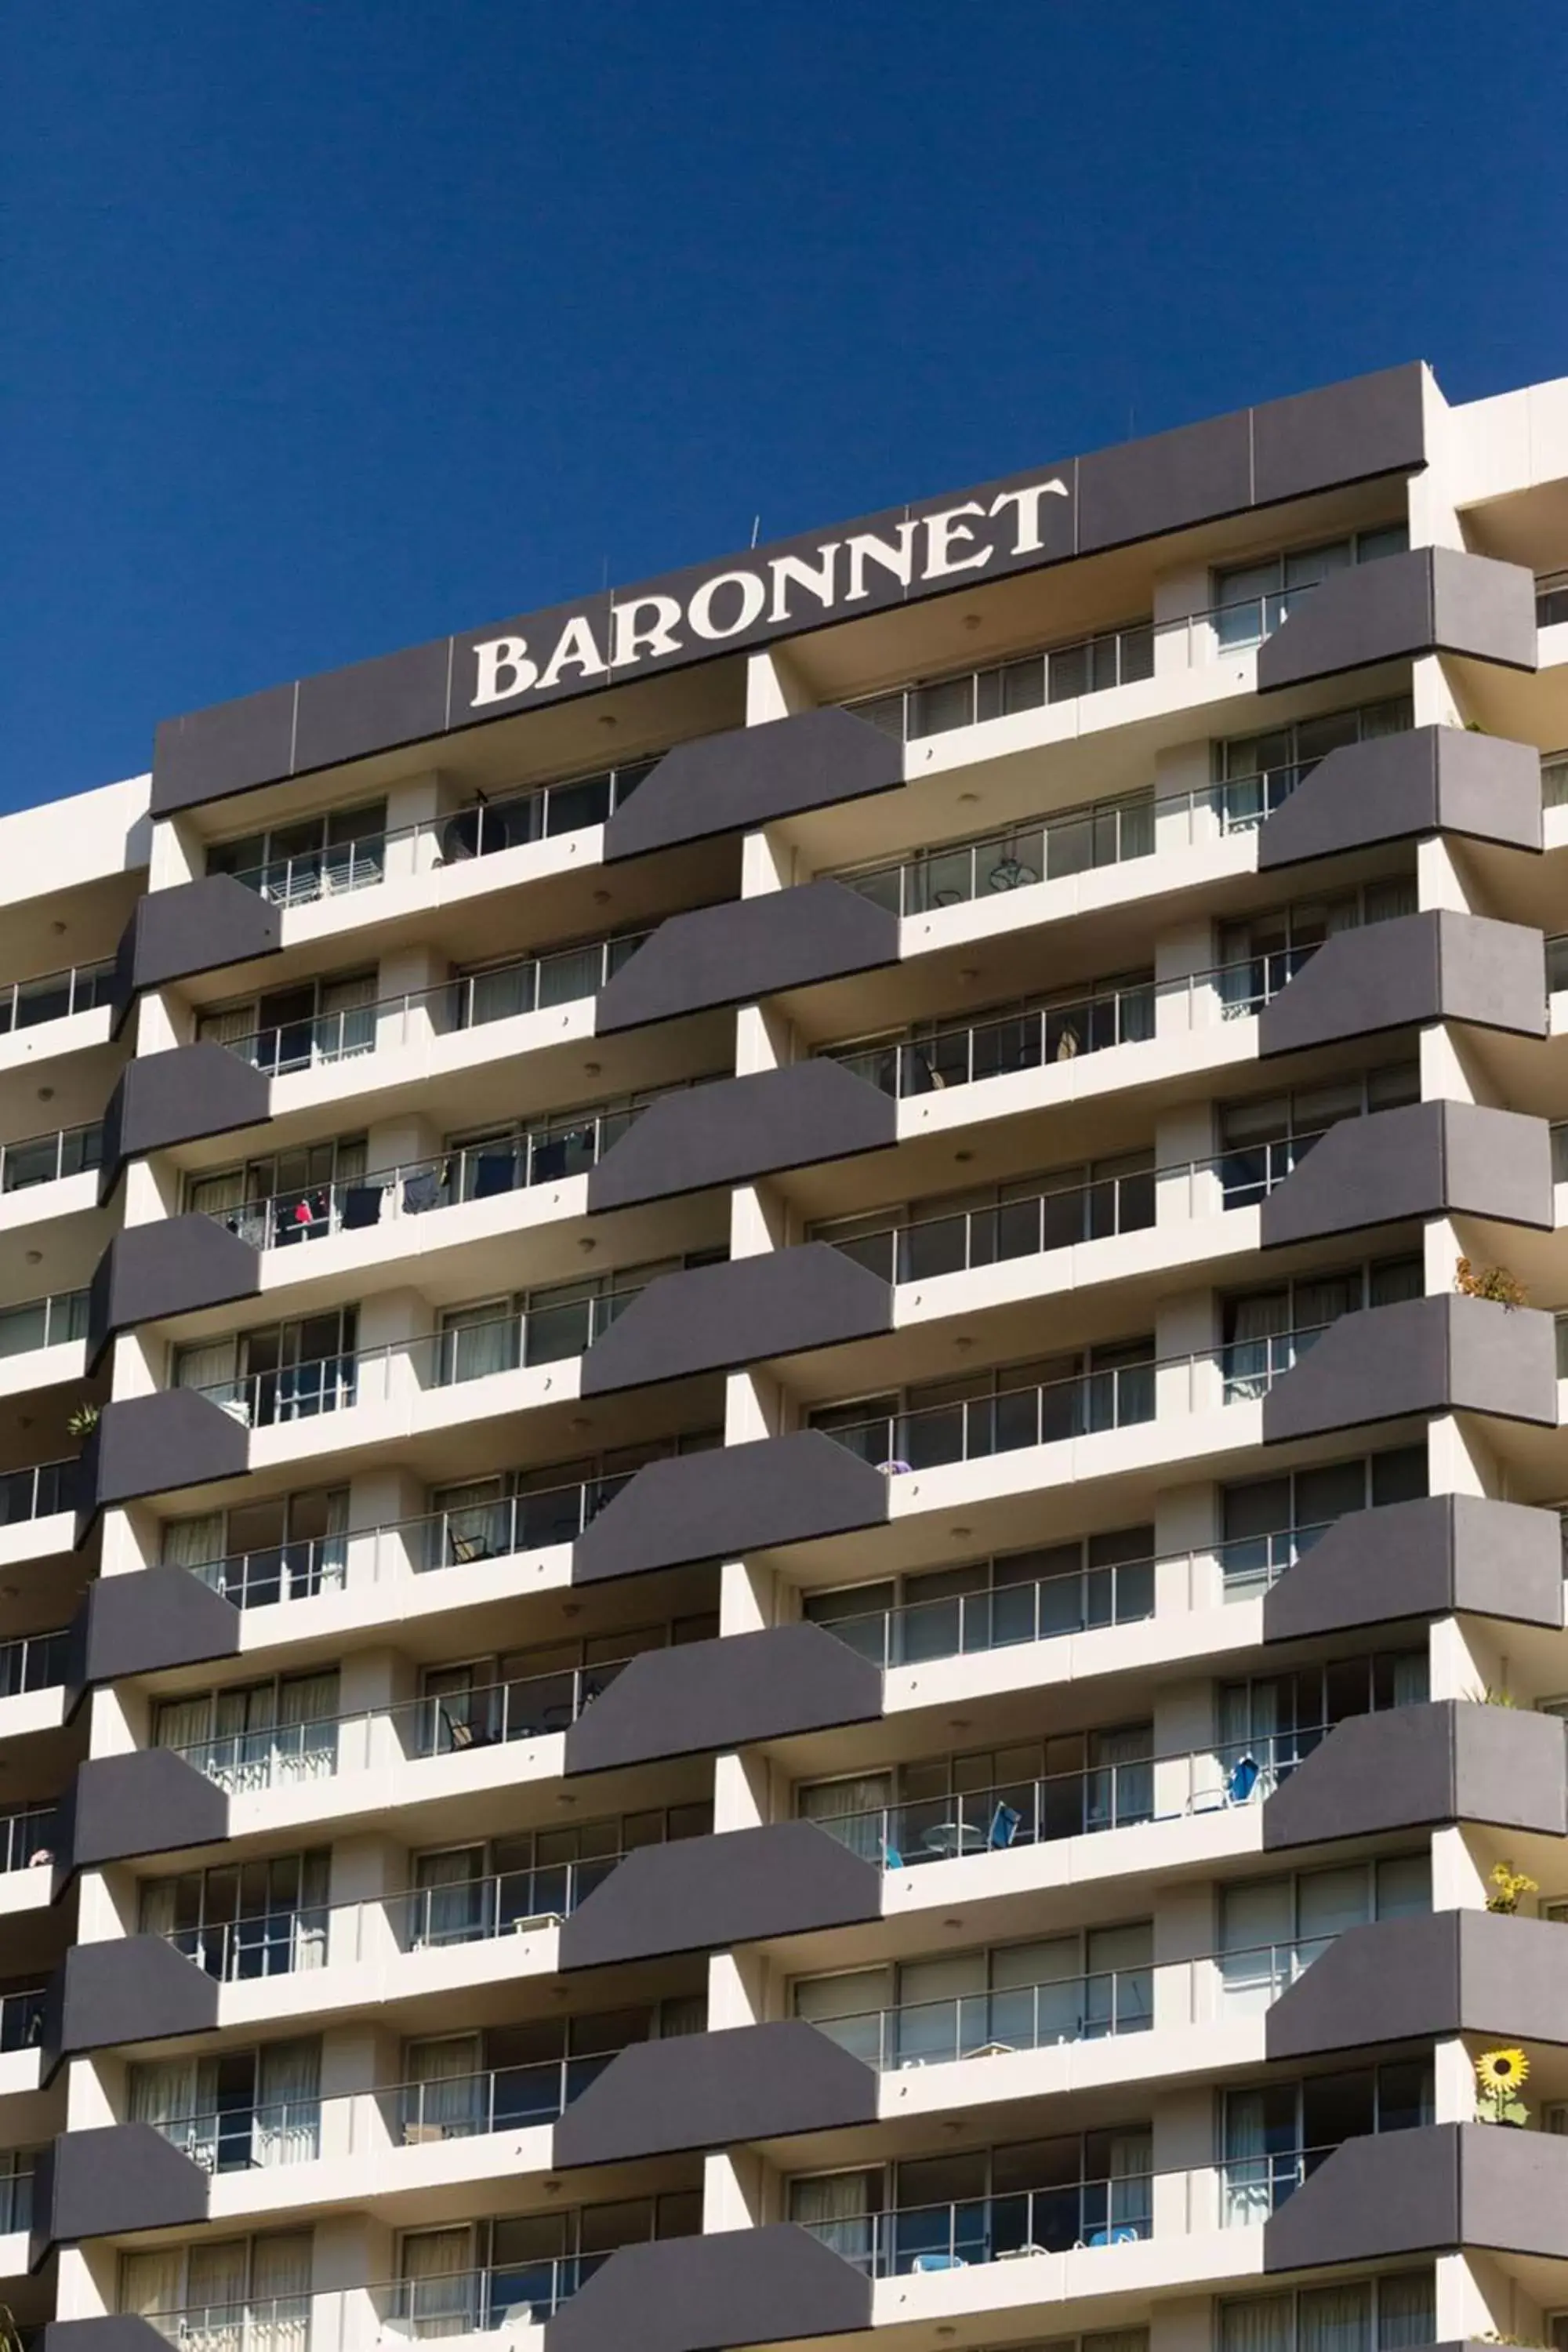 Property Building in Baronnet Apartments